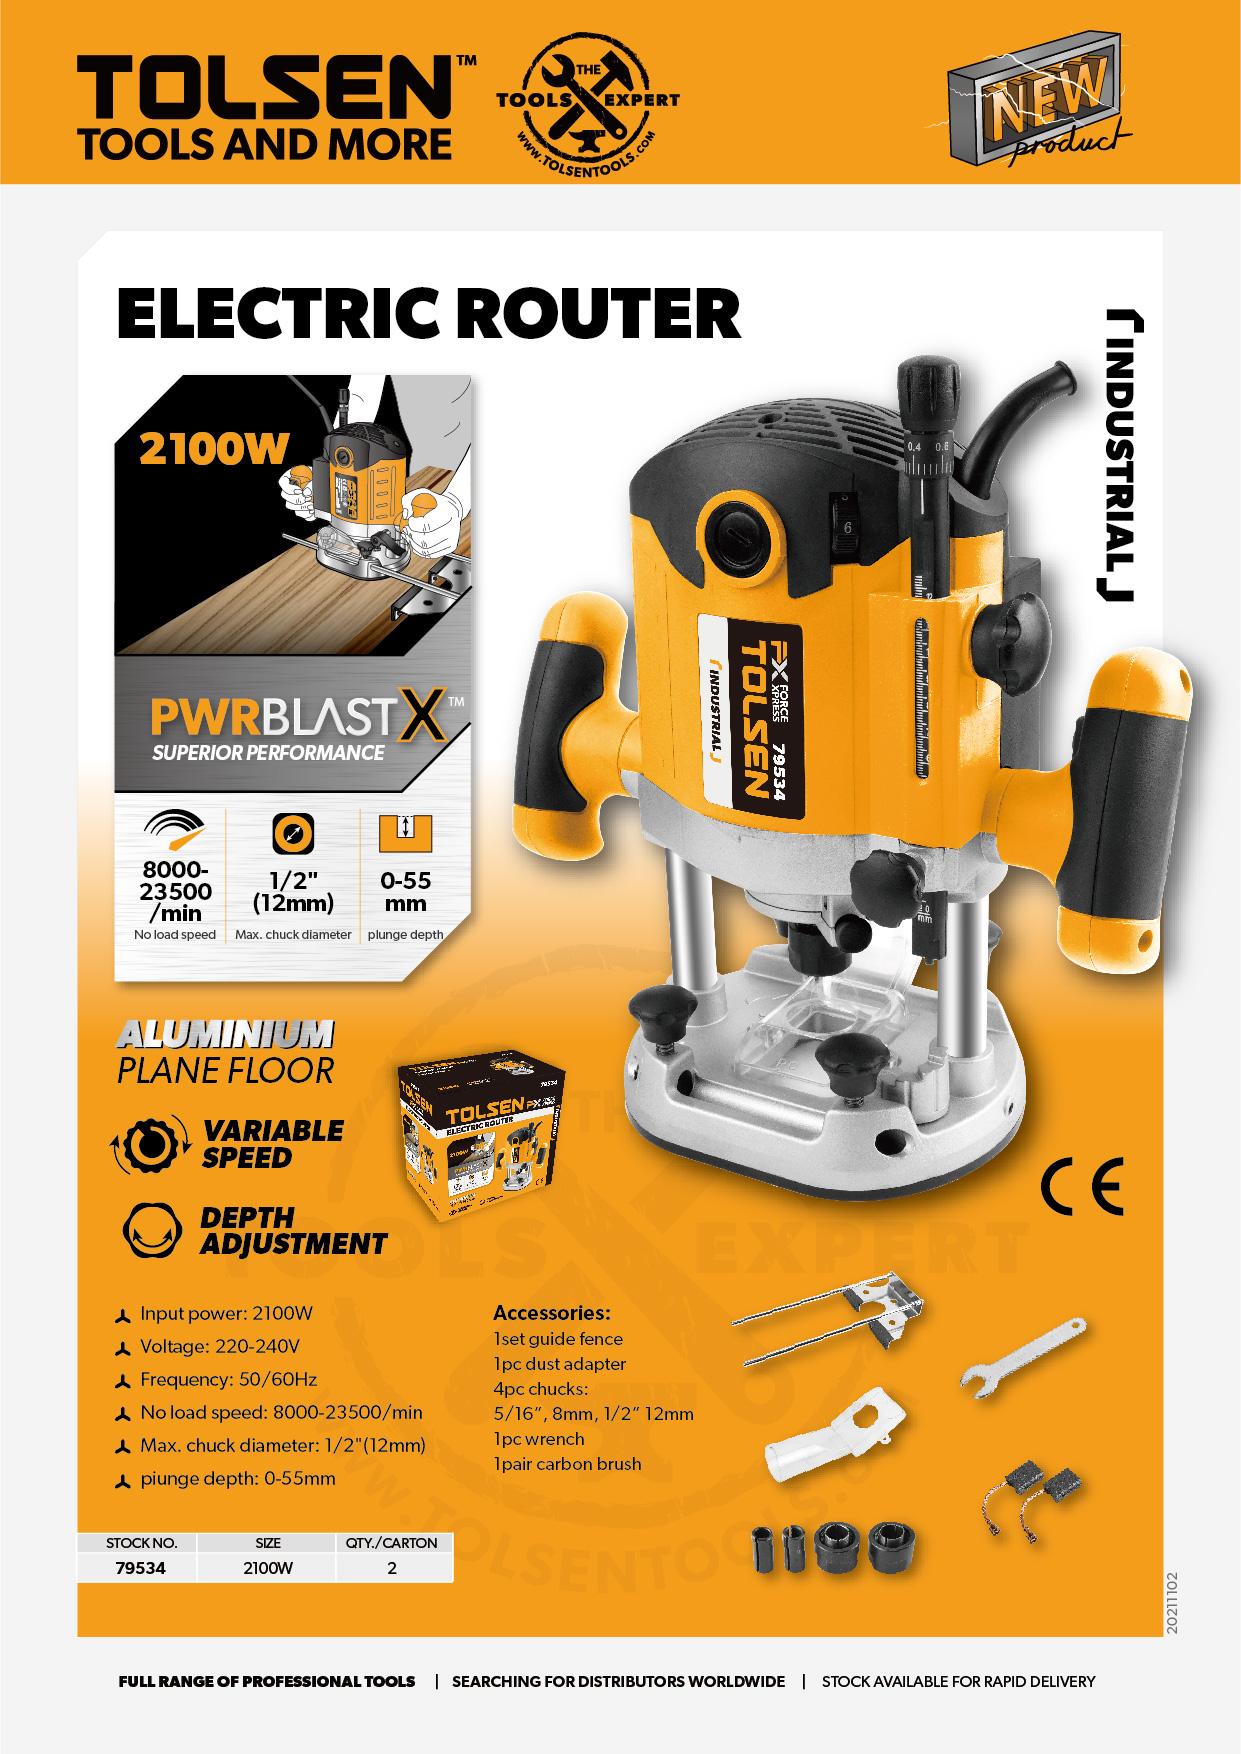 Industrial Electric Router Trimmer w/ Free 8 Accessories (2100W) PWRBLAST X